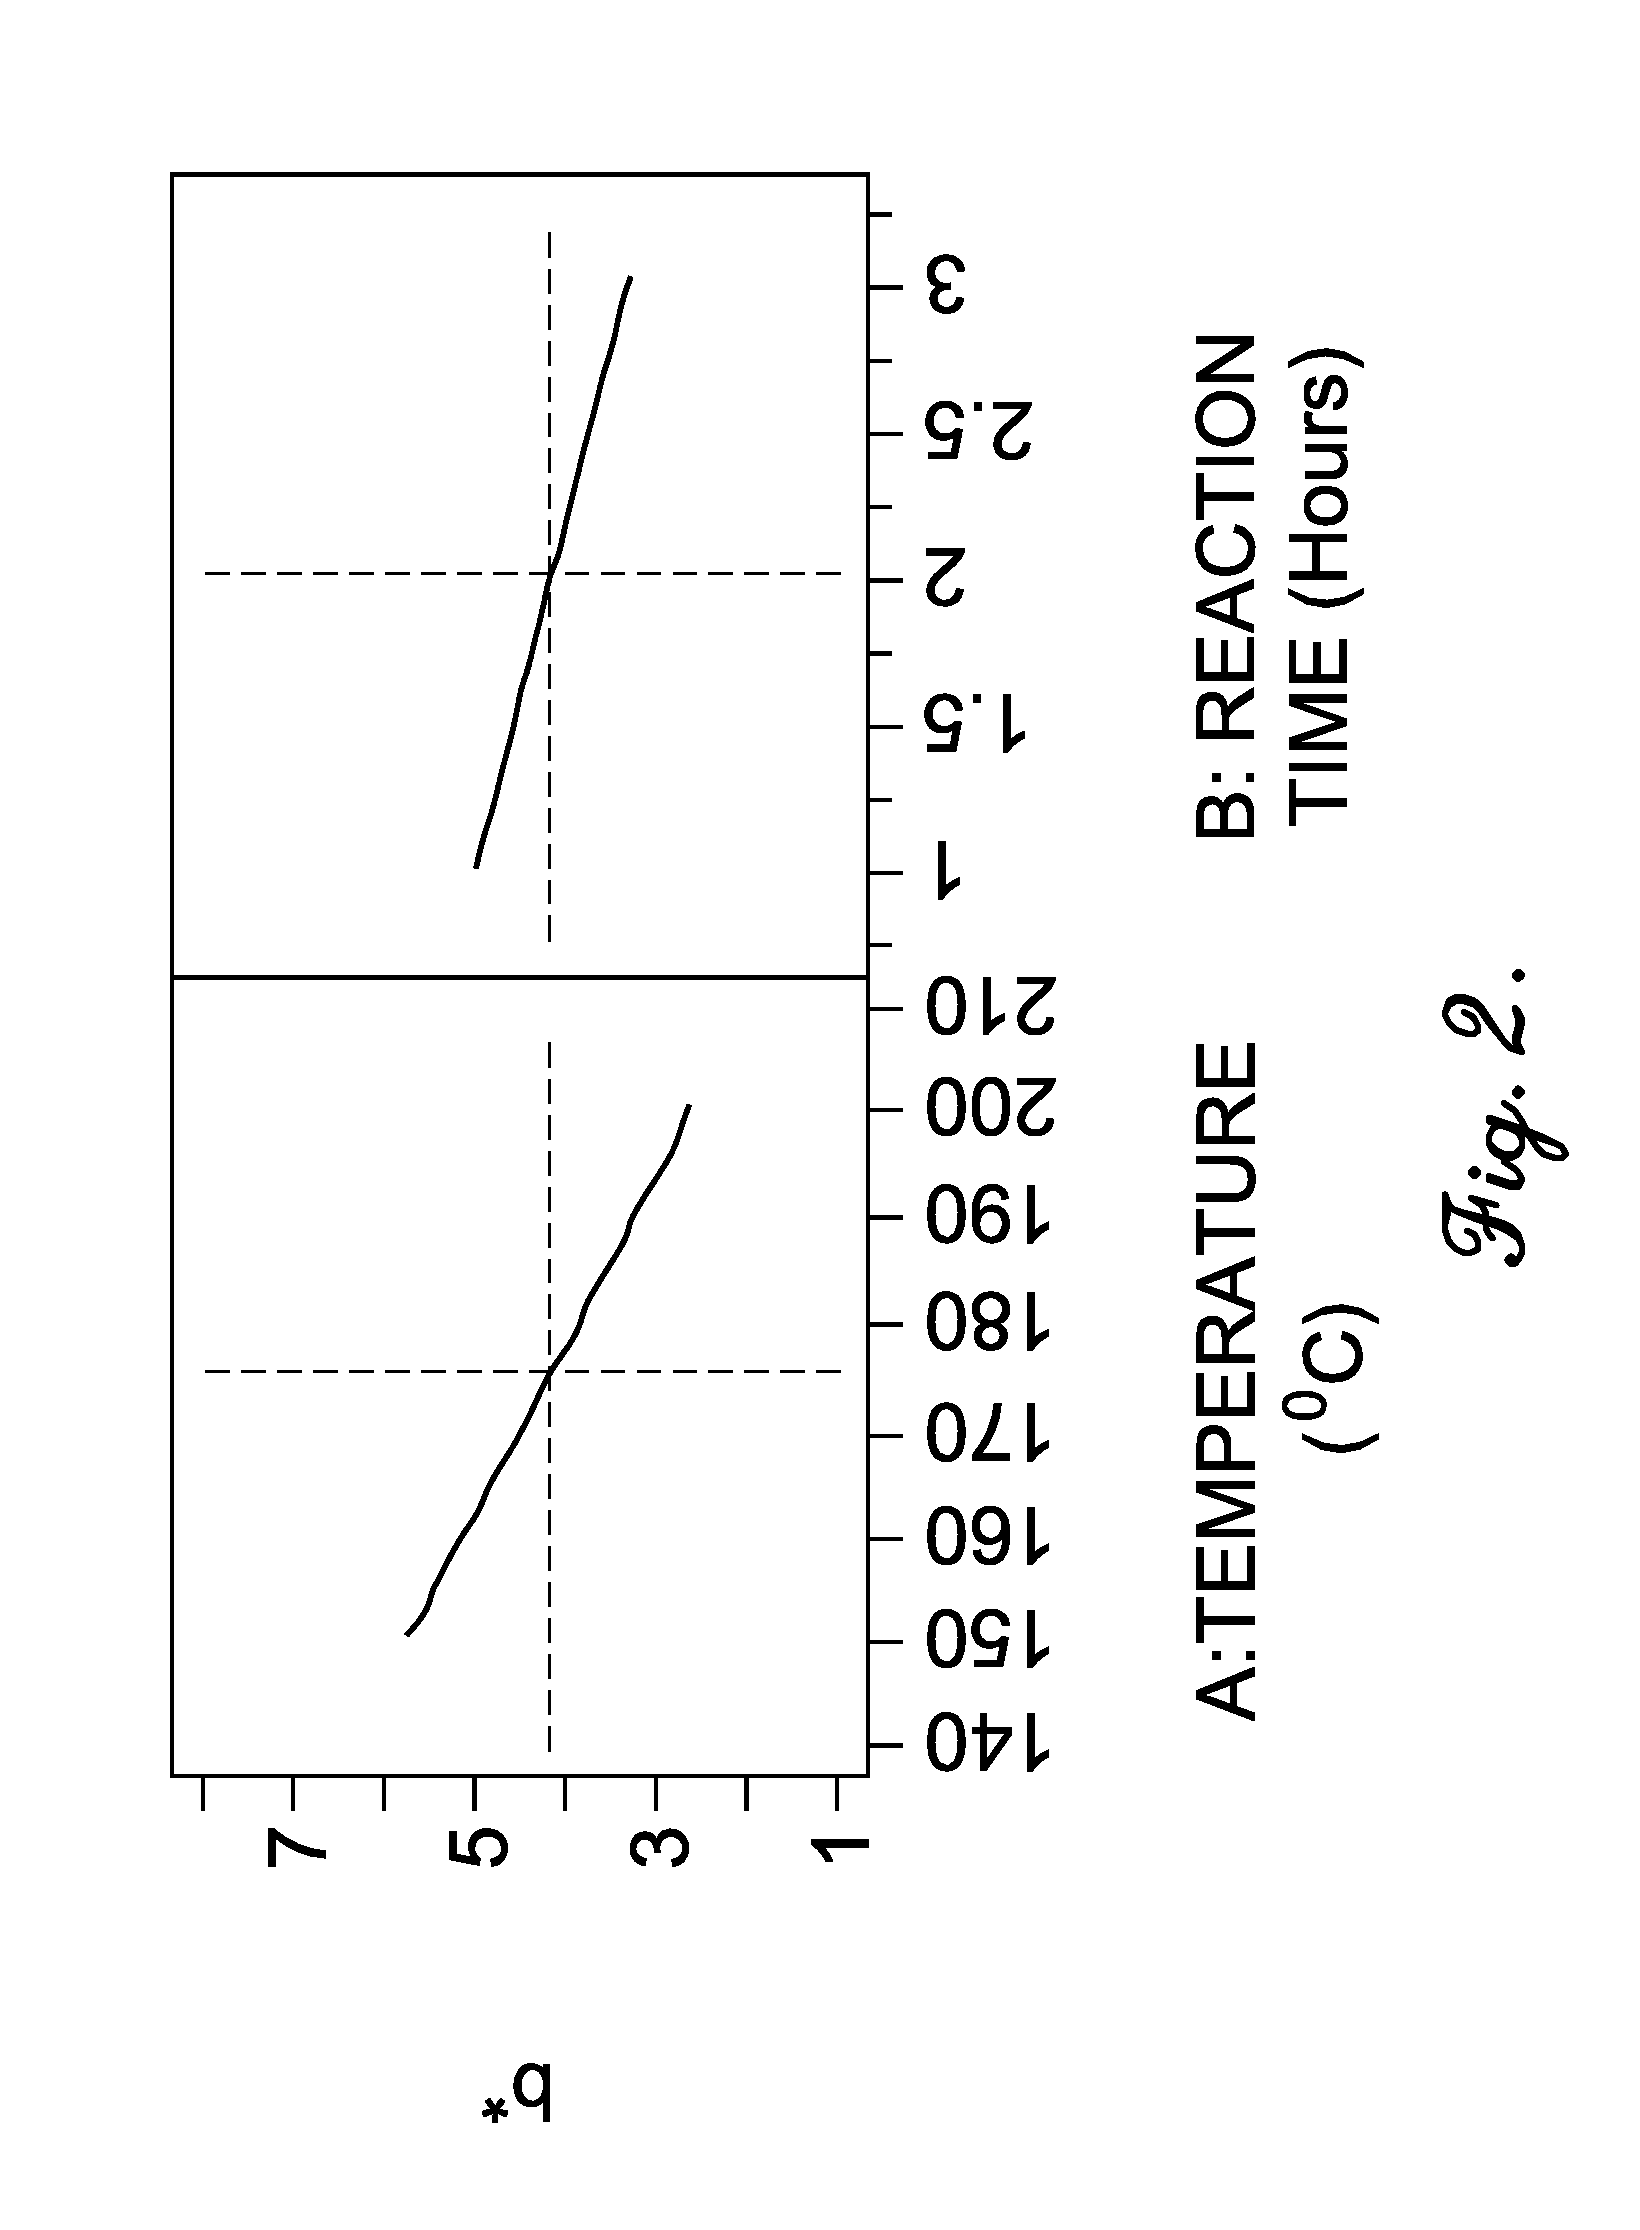 Oxidation process to produce a purified carboxylic acid product via solvent displacement and post oxidation